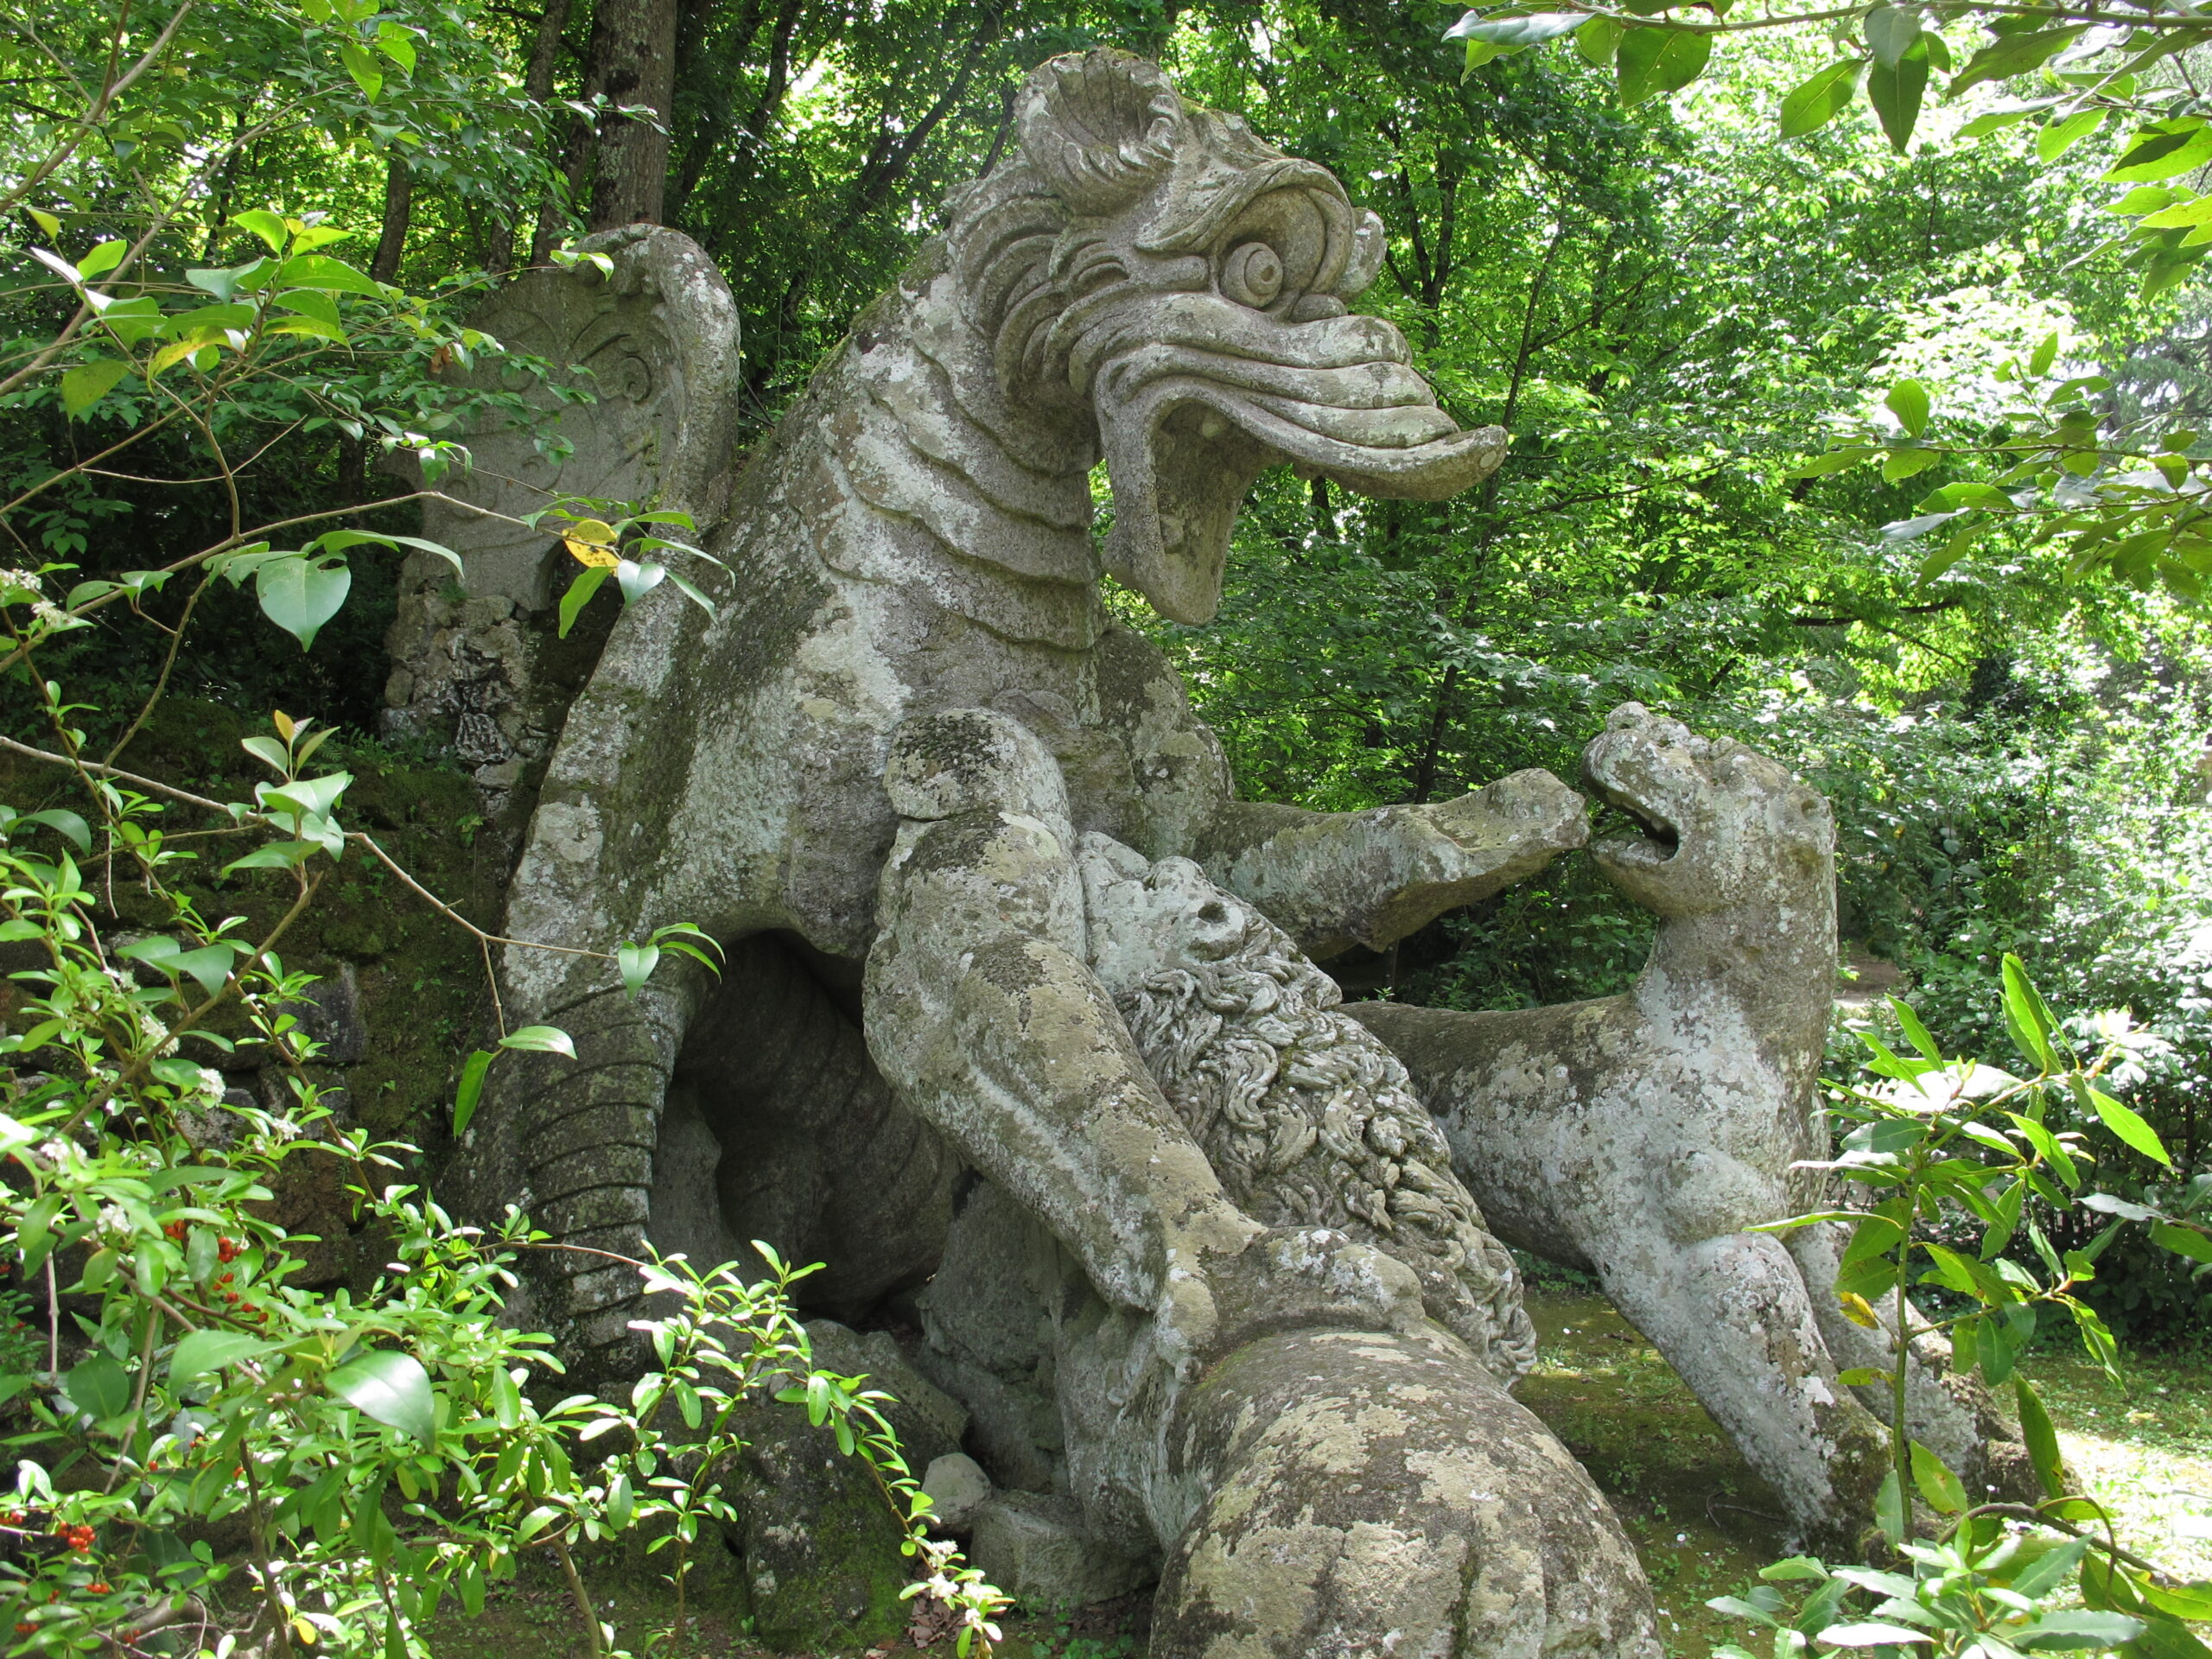 A sculpture of a dragon fighting with lions in Bomarzo, Italy